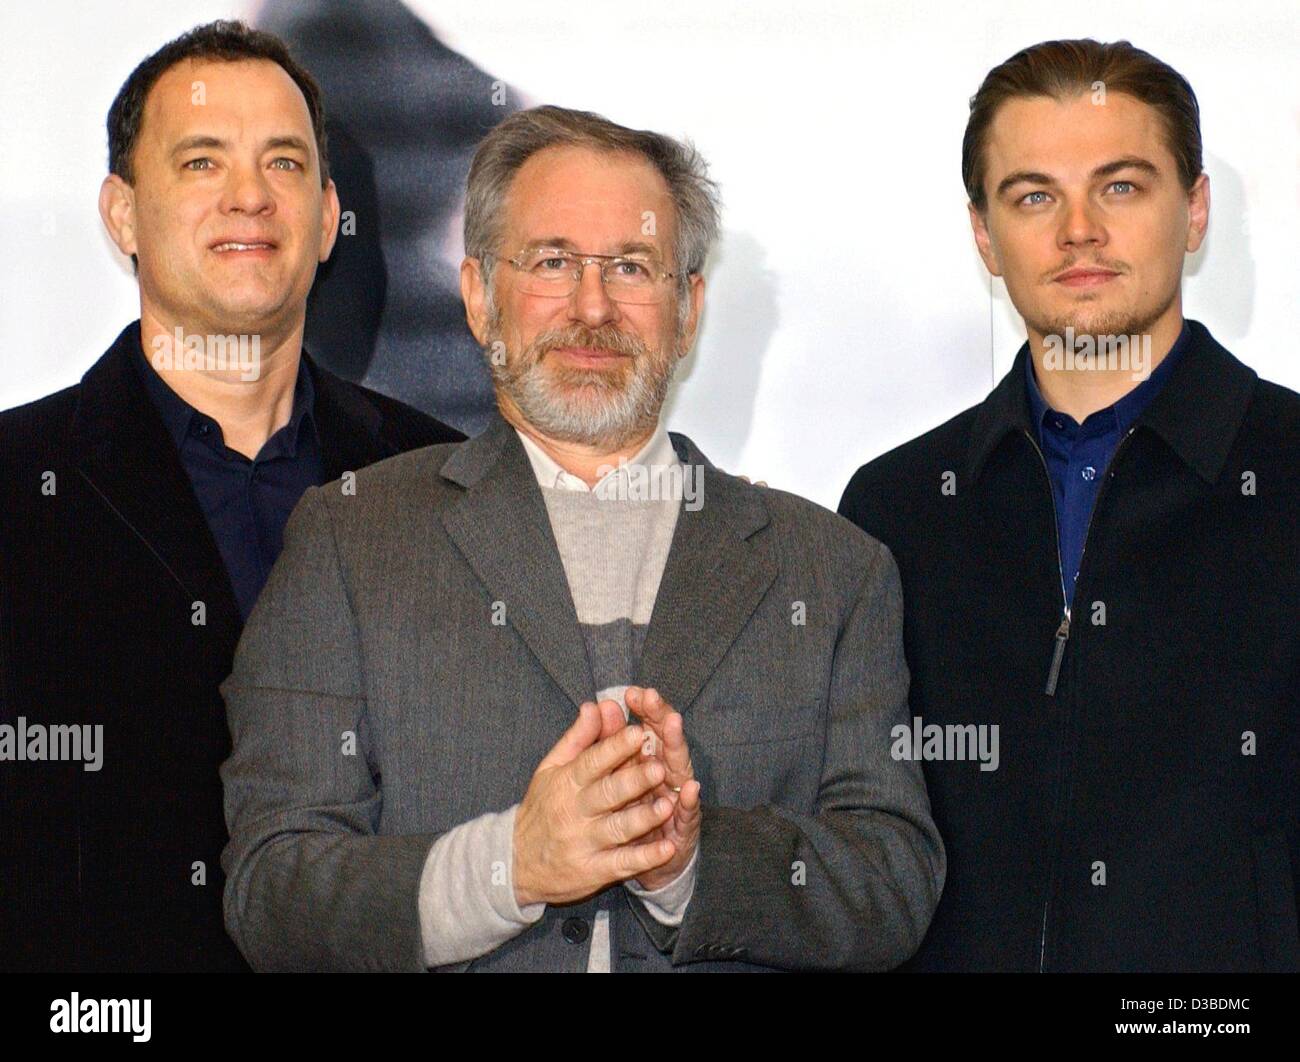 (dpa) - US actors Leonardo DiCaprio (L) and Tom Hanks (R) pose with US film director Steven Spielberg during the presentation of their new film 'Catch Me If You Can' in Berlin, 26 January 2003. In the film, based on a true story, DiCaprio plays a successful con artist who manages to pass himself off Stock Photo